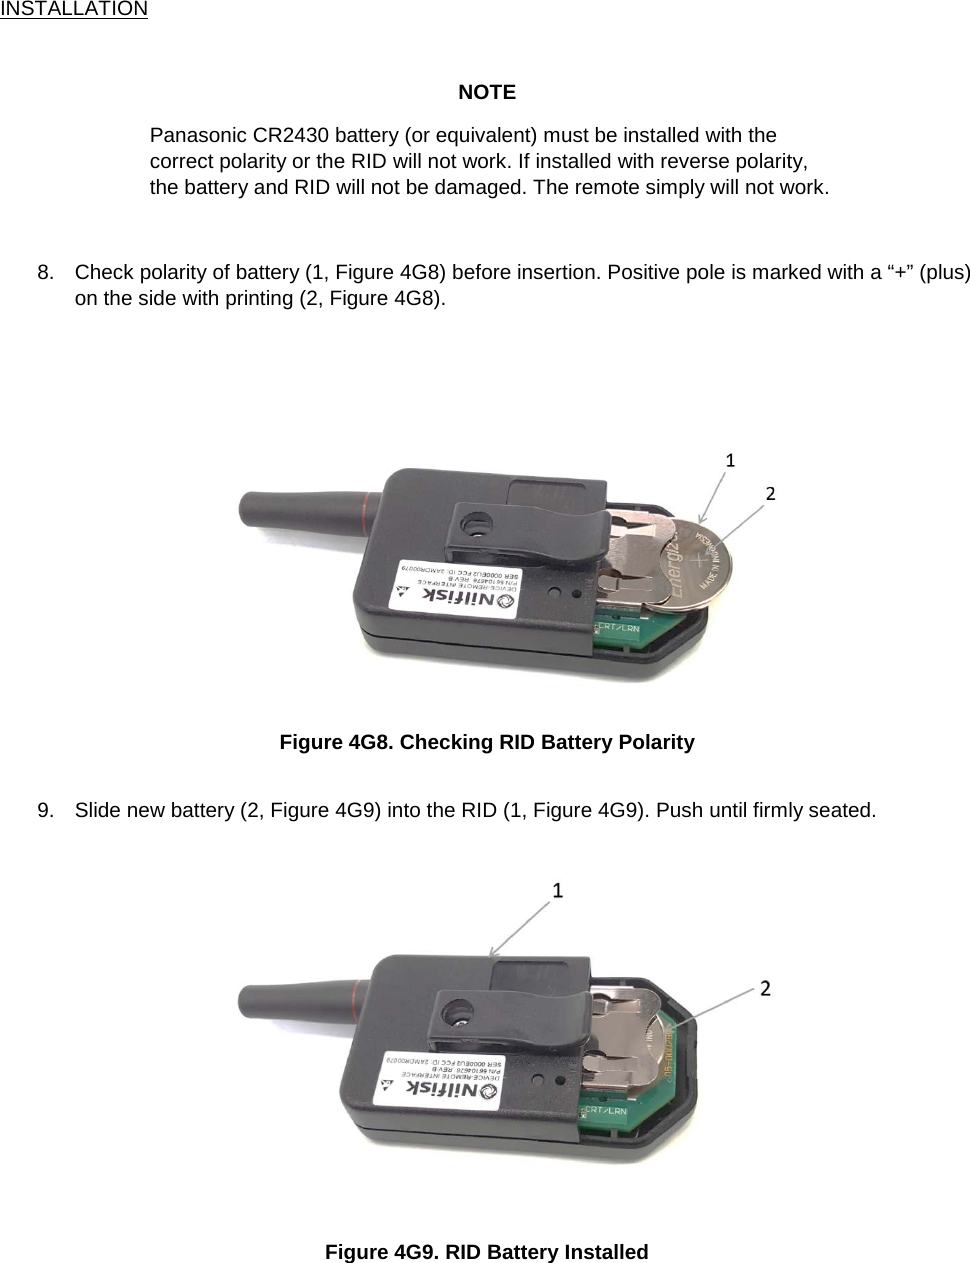 INSTALLATION  NOTE Panasonic CR2430 battery (or equivalent) must be installed with the correct polarity or the RID will not work. If installed with reverse polarity, the battery and RID will not be damaged. The remote simply will not work.   8. Check polarity of battery (1, Figure 4G8) before insertion. Positive pole is marked with a “+” (plus) on the side with printing (2, Figure 4G8).     Figure 4G8. Checking RID Battery Polarity  9. Slide new battery (2, Figure 4G9) into the RID (1, Figure 4G9). Push until firmly seated.  Figure 4G9. RID Battery Installed    